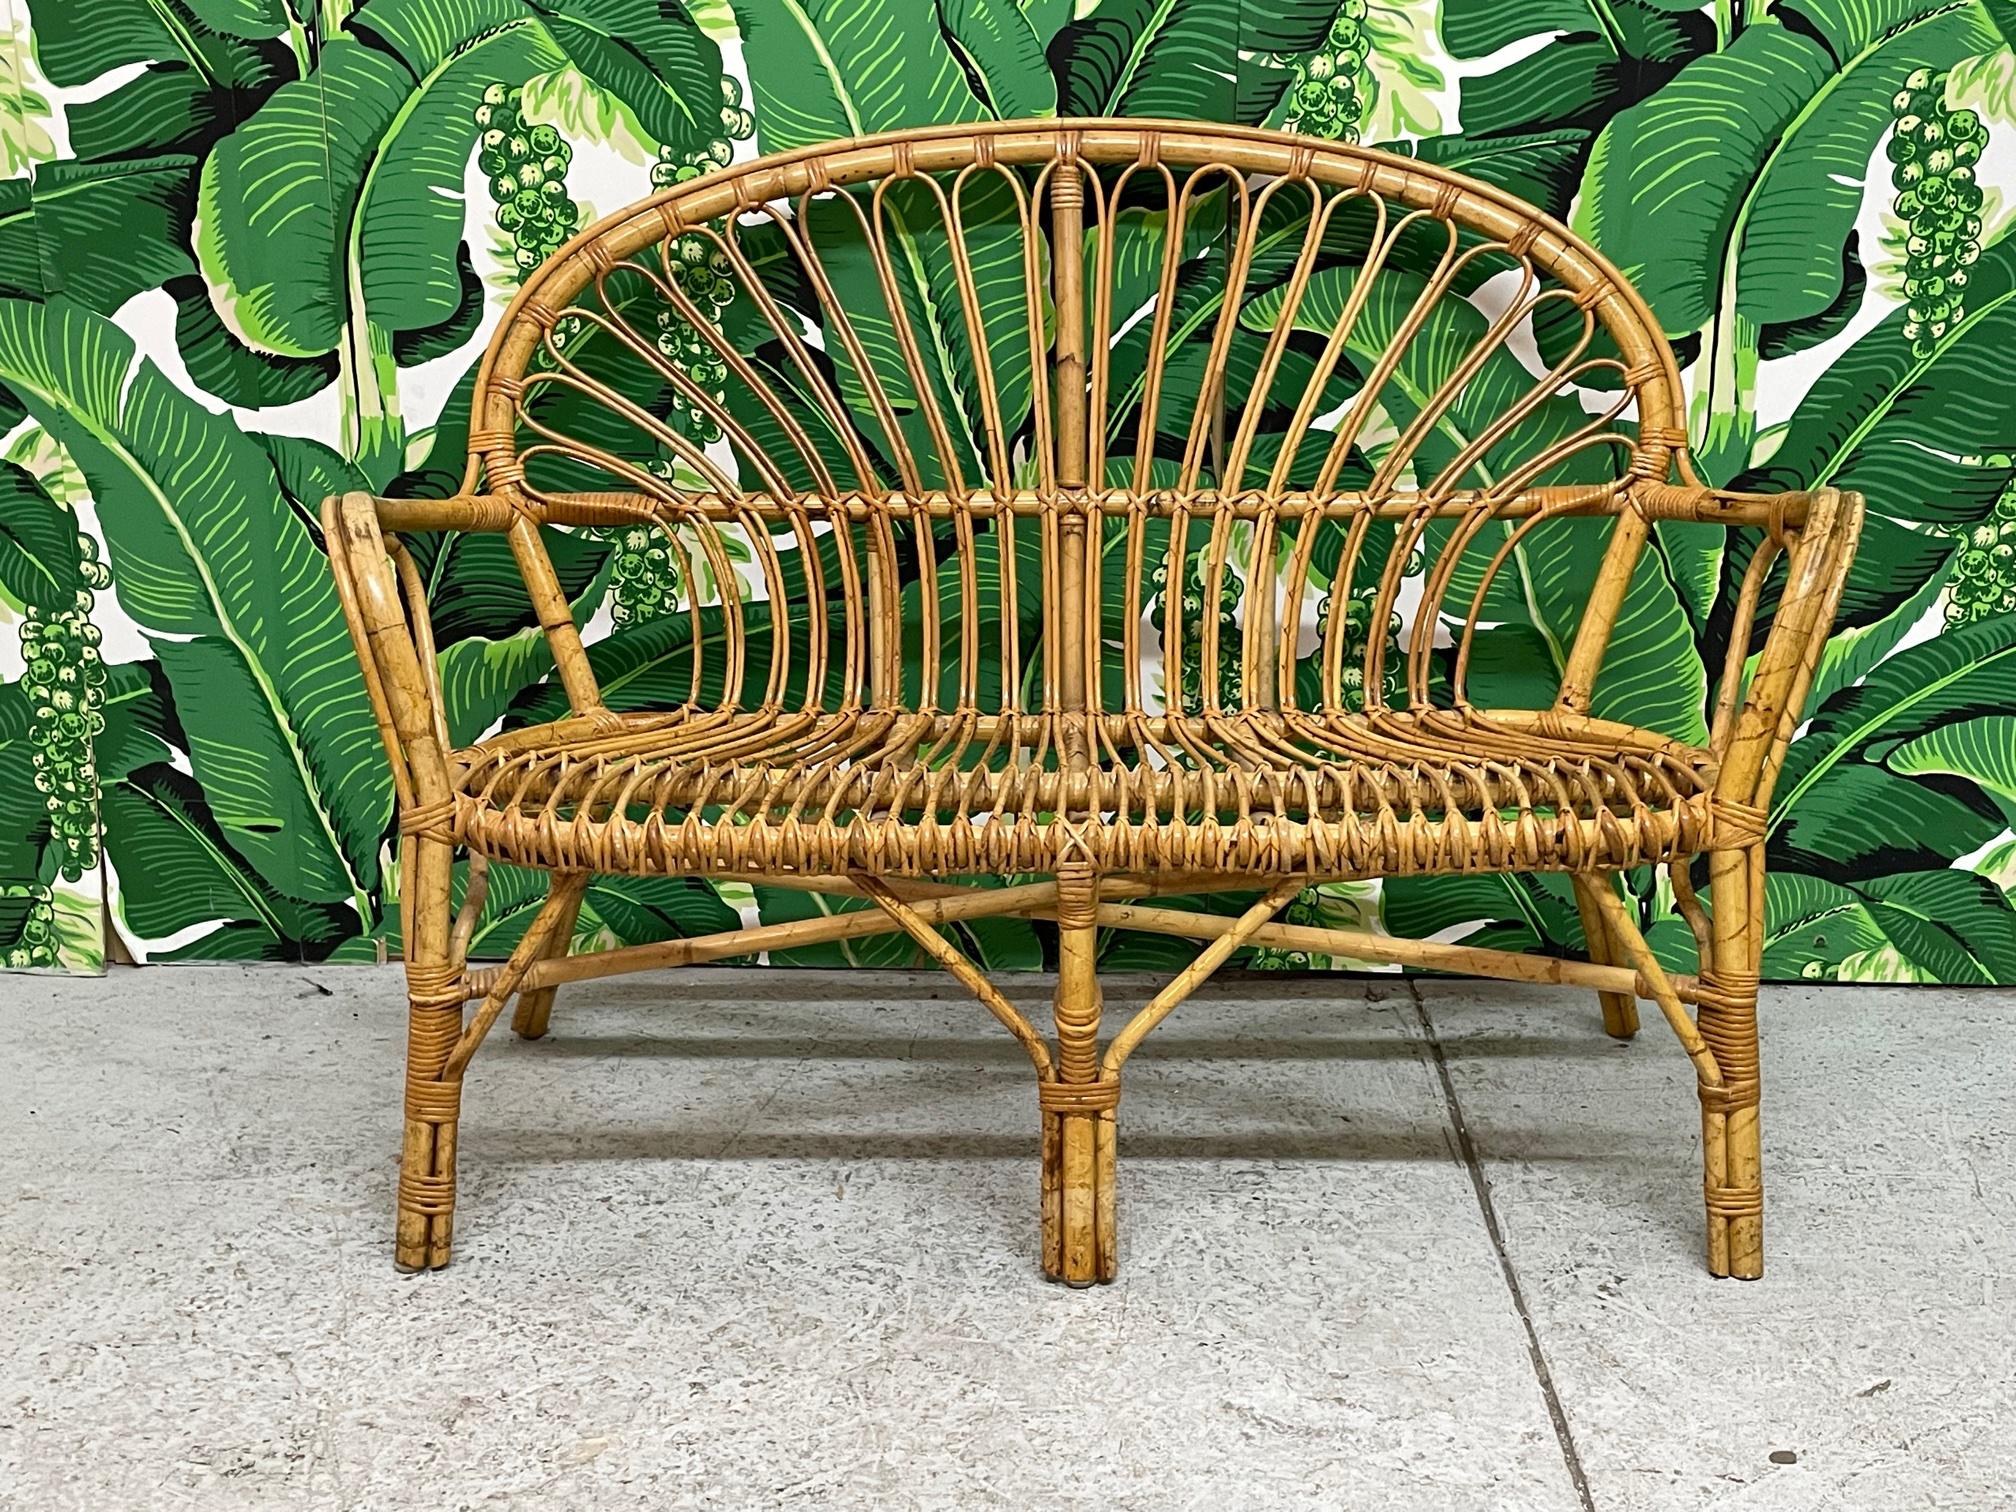 Vintage rattan loveseat or settee features intricate fretwork and a rich, warm finish. We have 5 of these available. Structurally sound and in good condition with minor imperfections consistent with age. May exhibit scuffs, marks, or wear, see